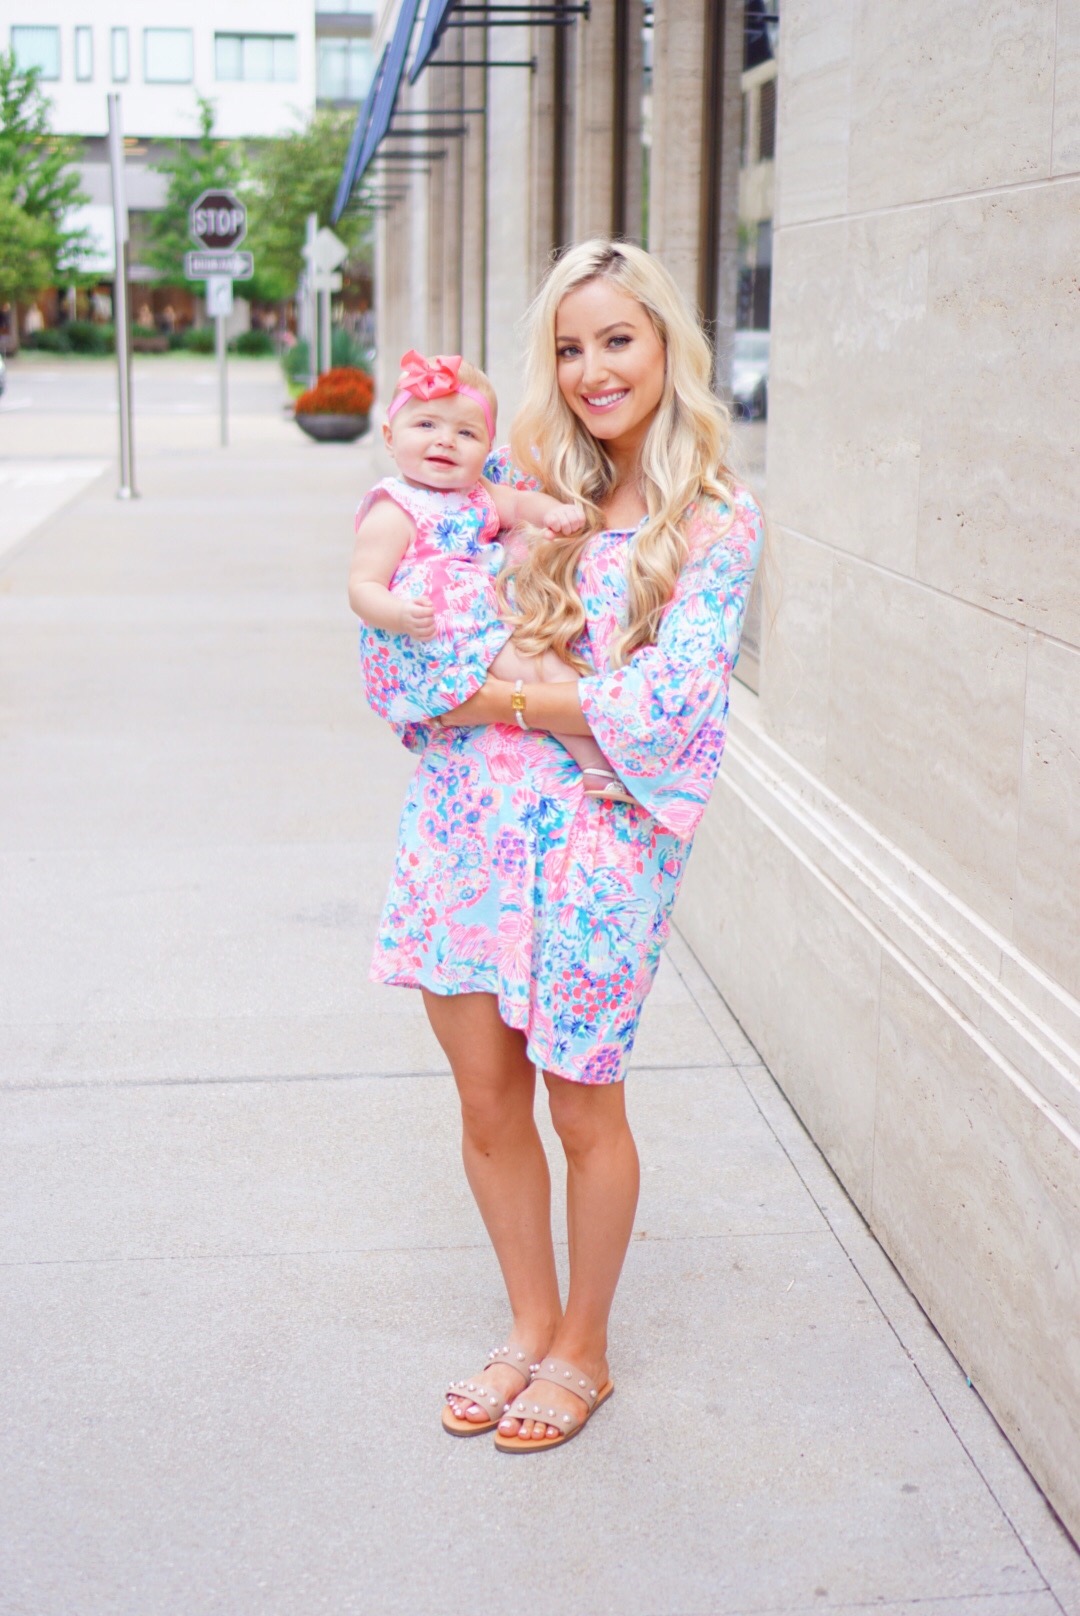 Katelyn Jones A Touch of Pink Blog Thoughts on Motherhood Parenting Advice